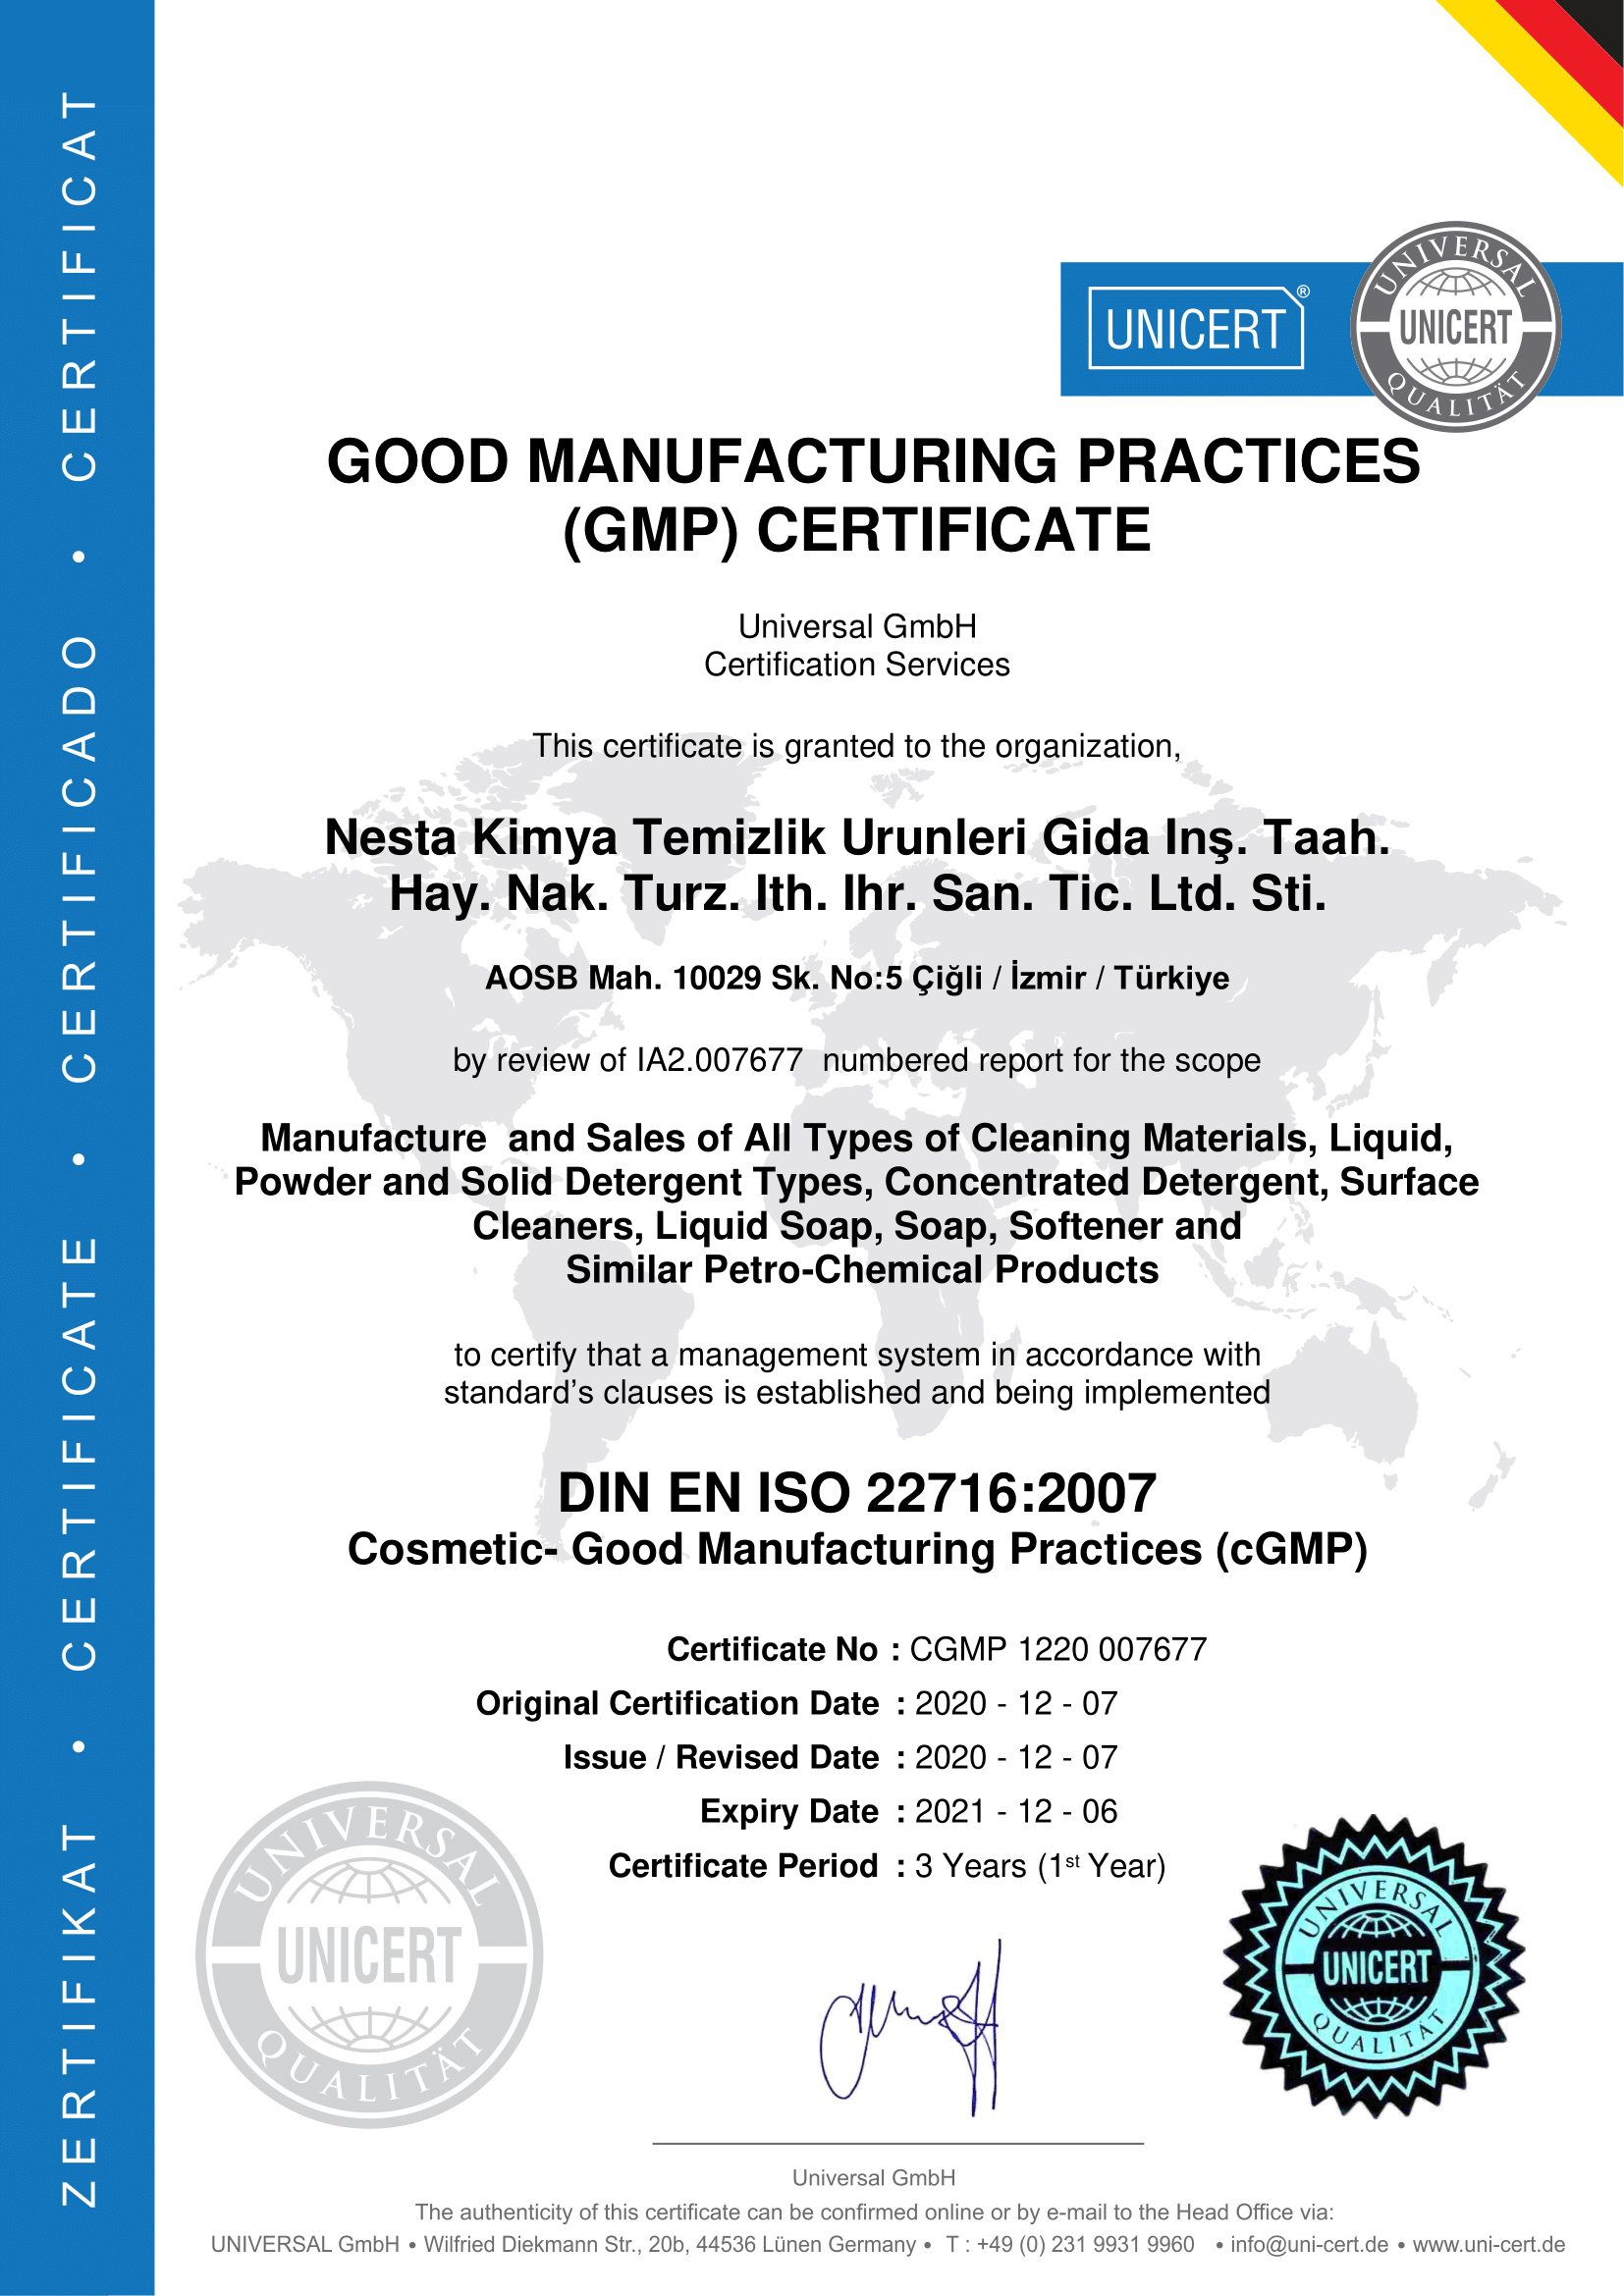  GOOD MANUFACTURİNG PRACTICES CERTIFICATE